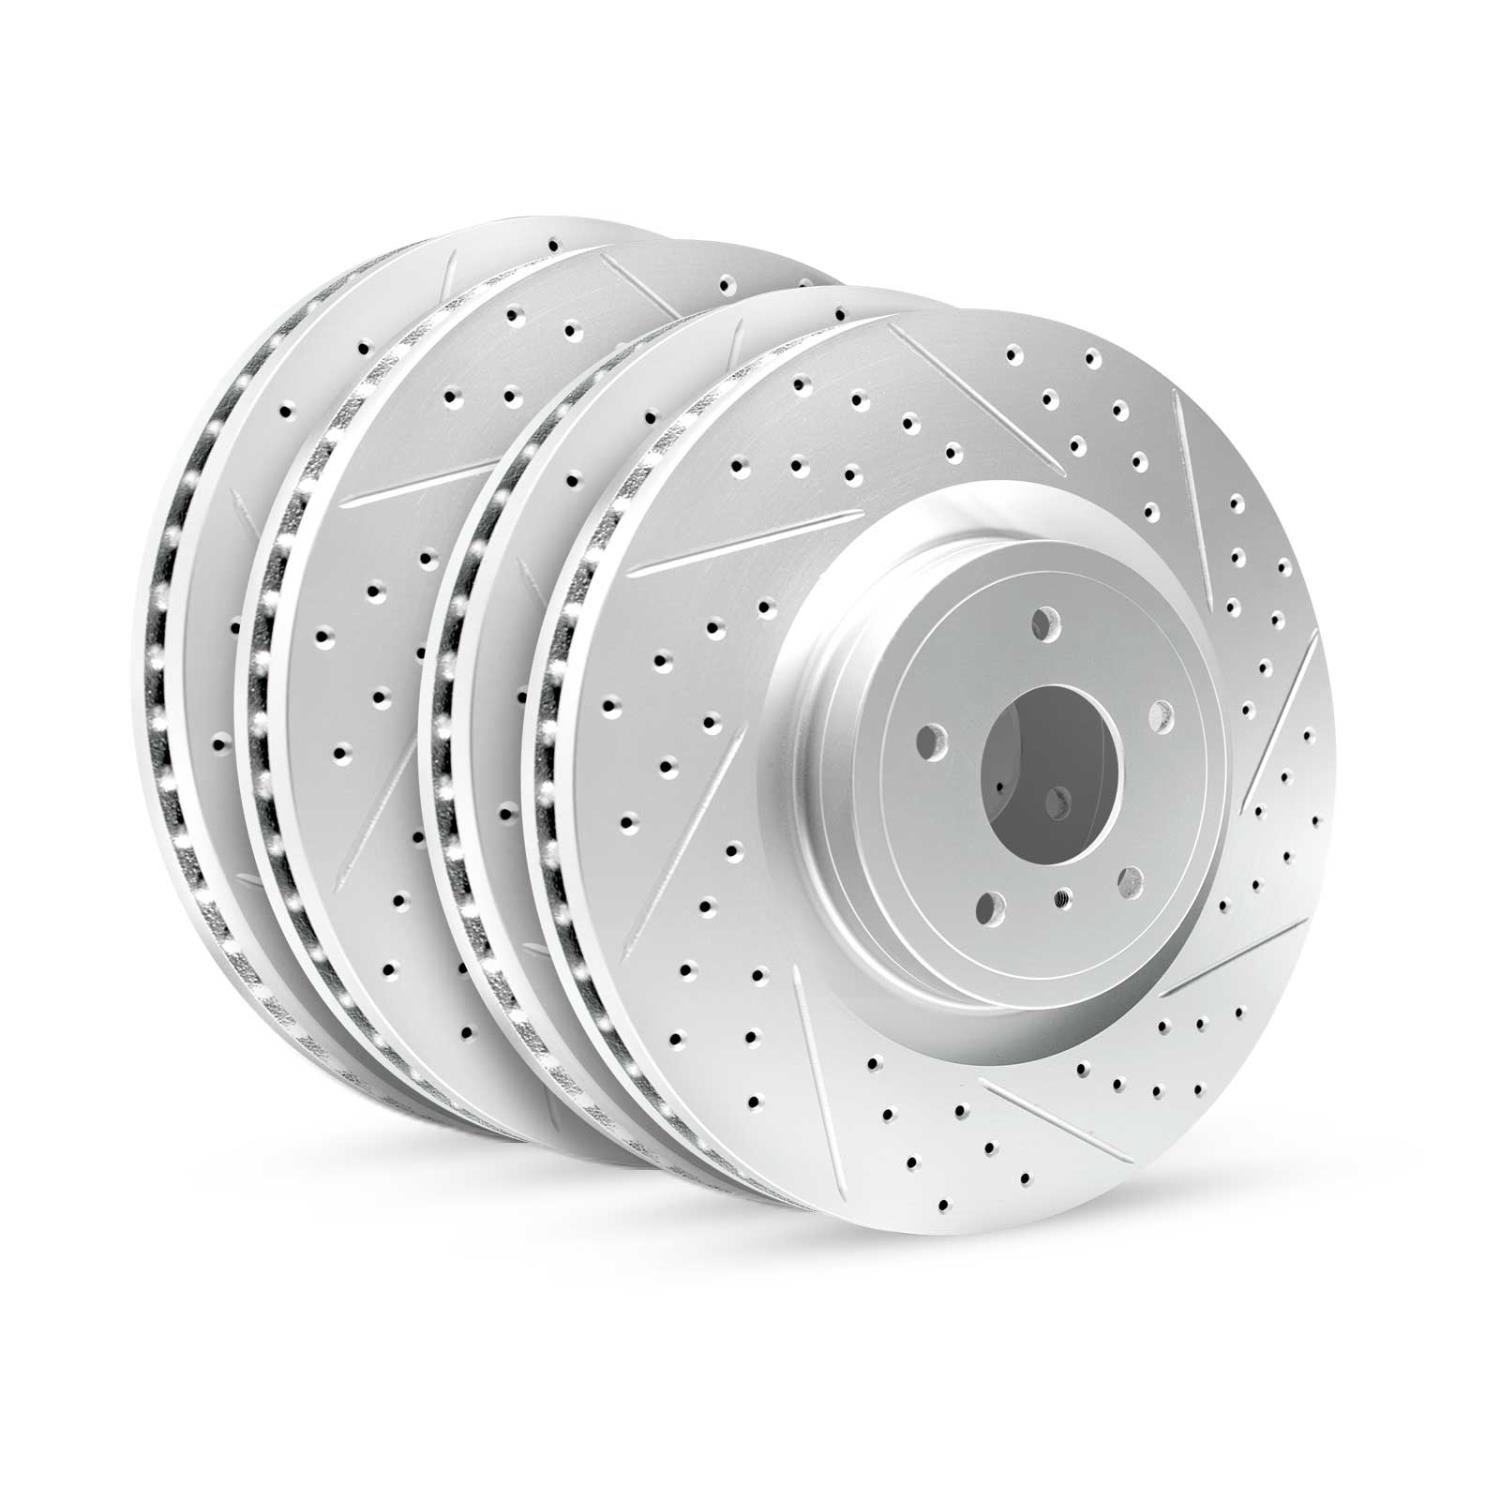 GEO-Carbon Drilled/Slotted Rotors, 1992-1996 Lexus/Toyota/Scion, Position: Front/Rear